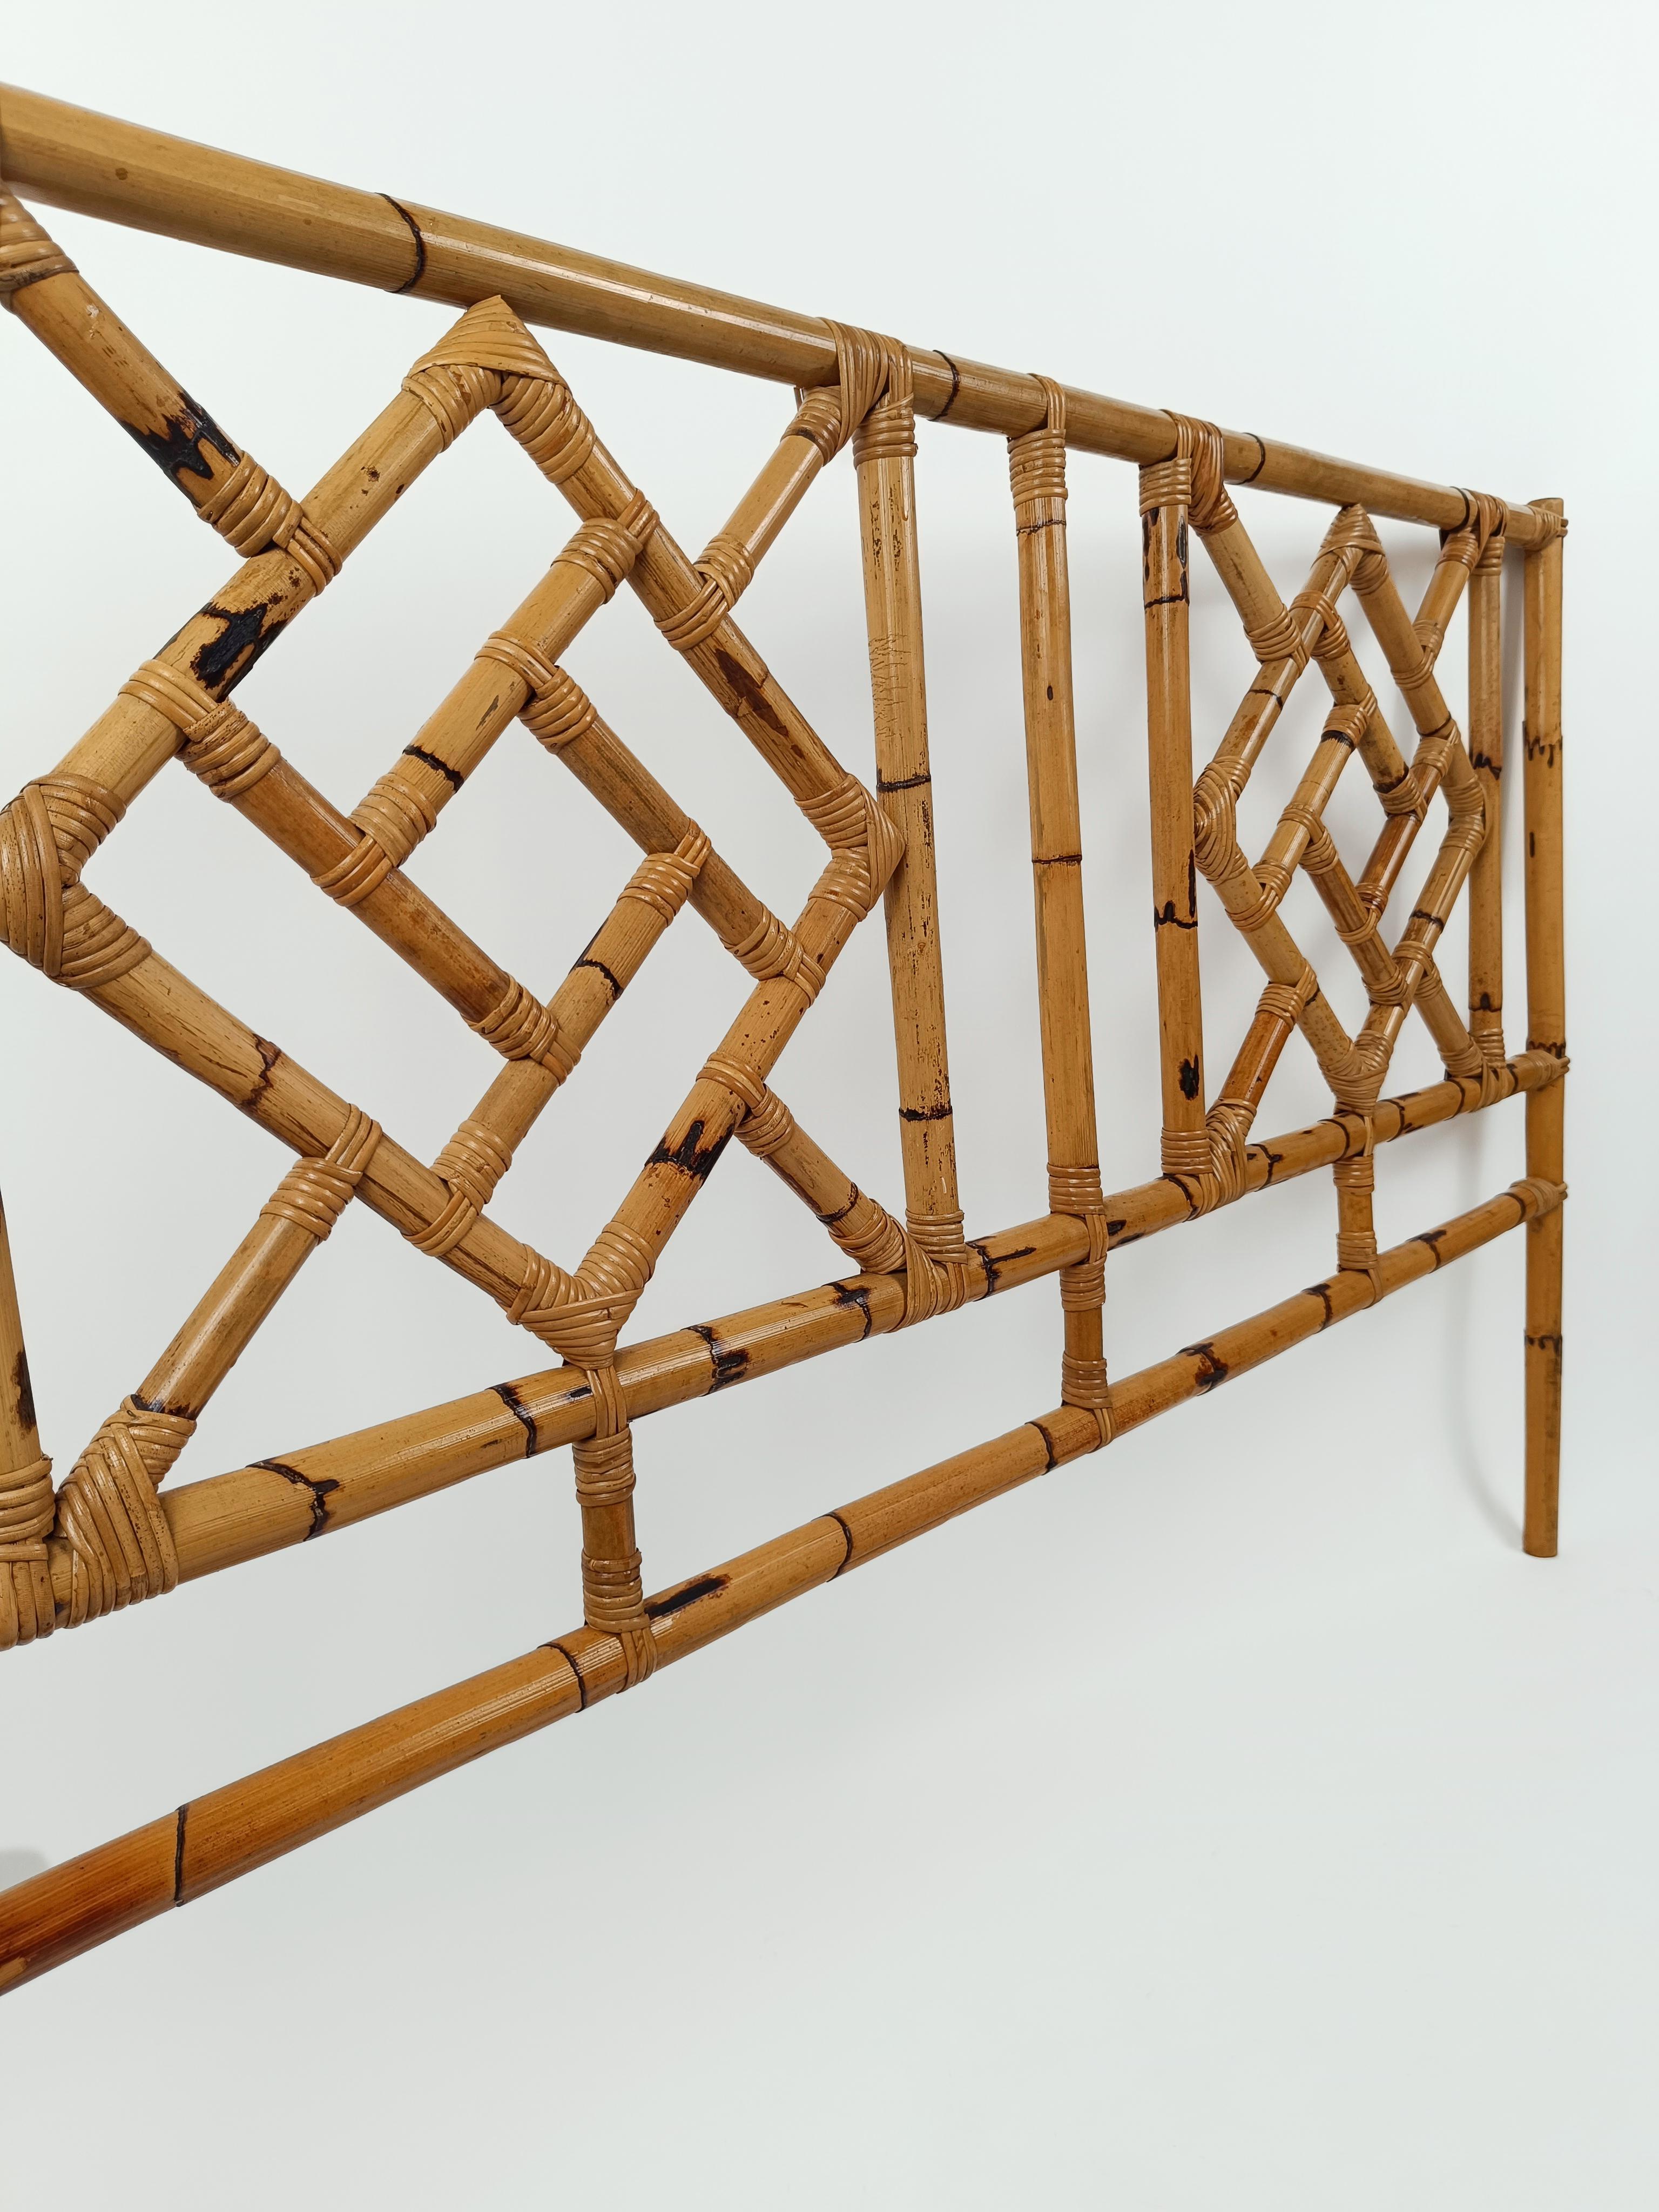  MId 20th Century Bamboo and Rattan Bed Headboard in Chinese Chippendale style  For Sale 2